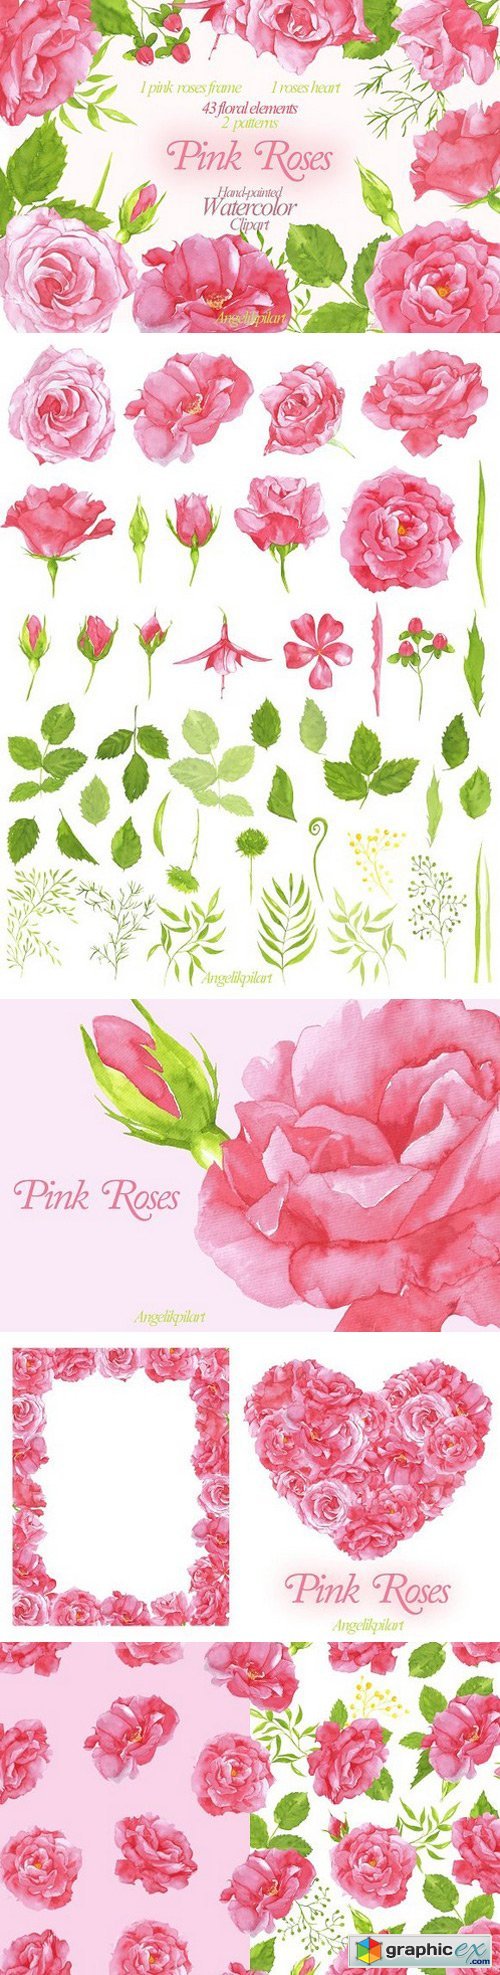 Watercolor Pink Roses clipart